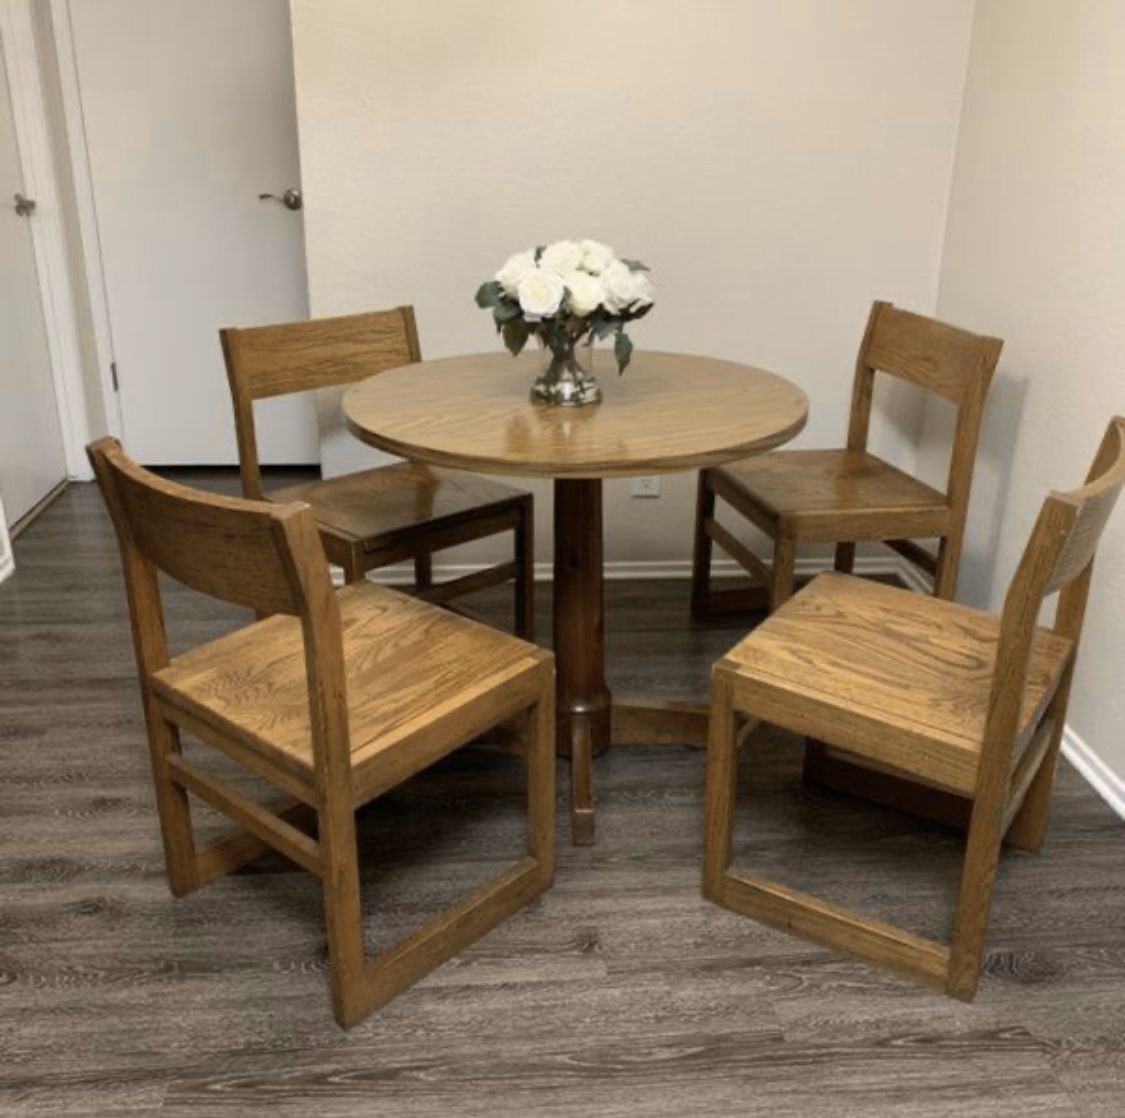 Chic Wood table dining kitchen set four chairs